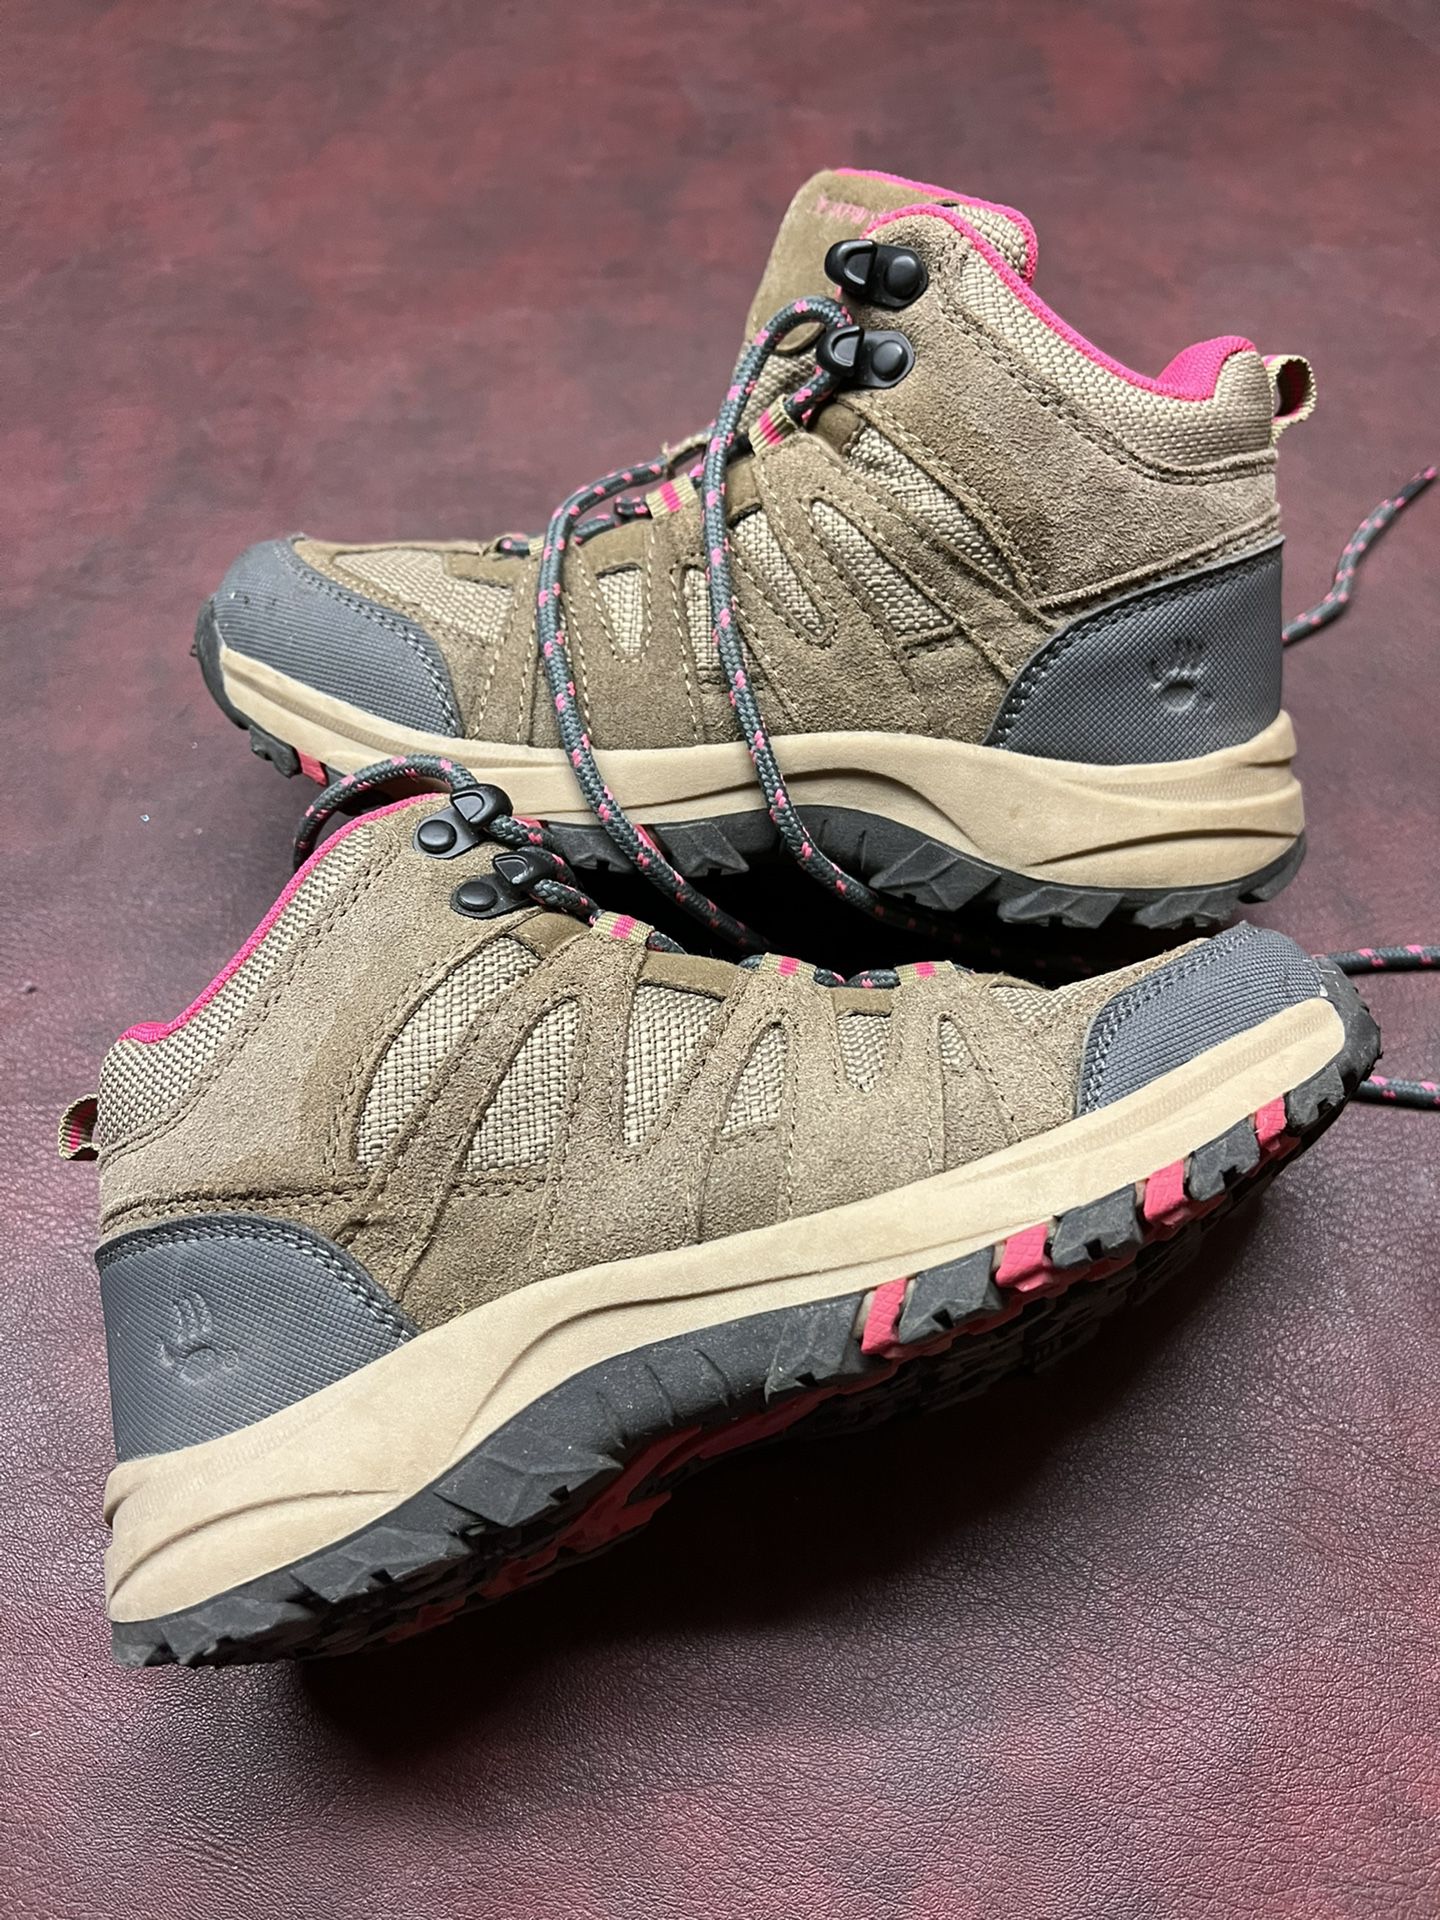 Hiking Boots bearpaws For Little Girls